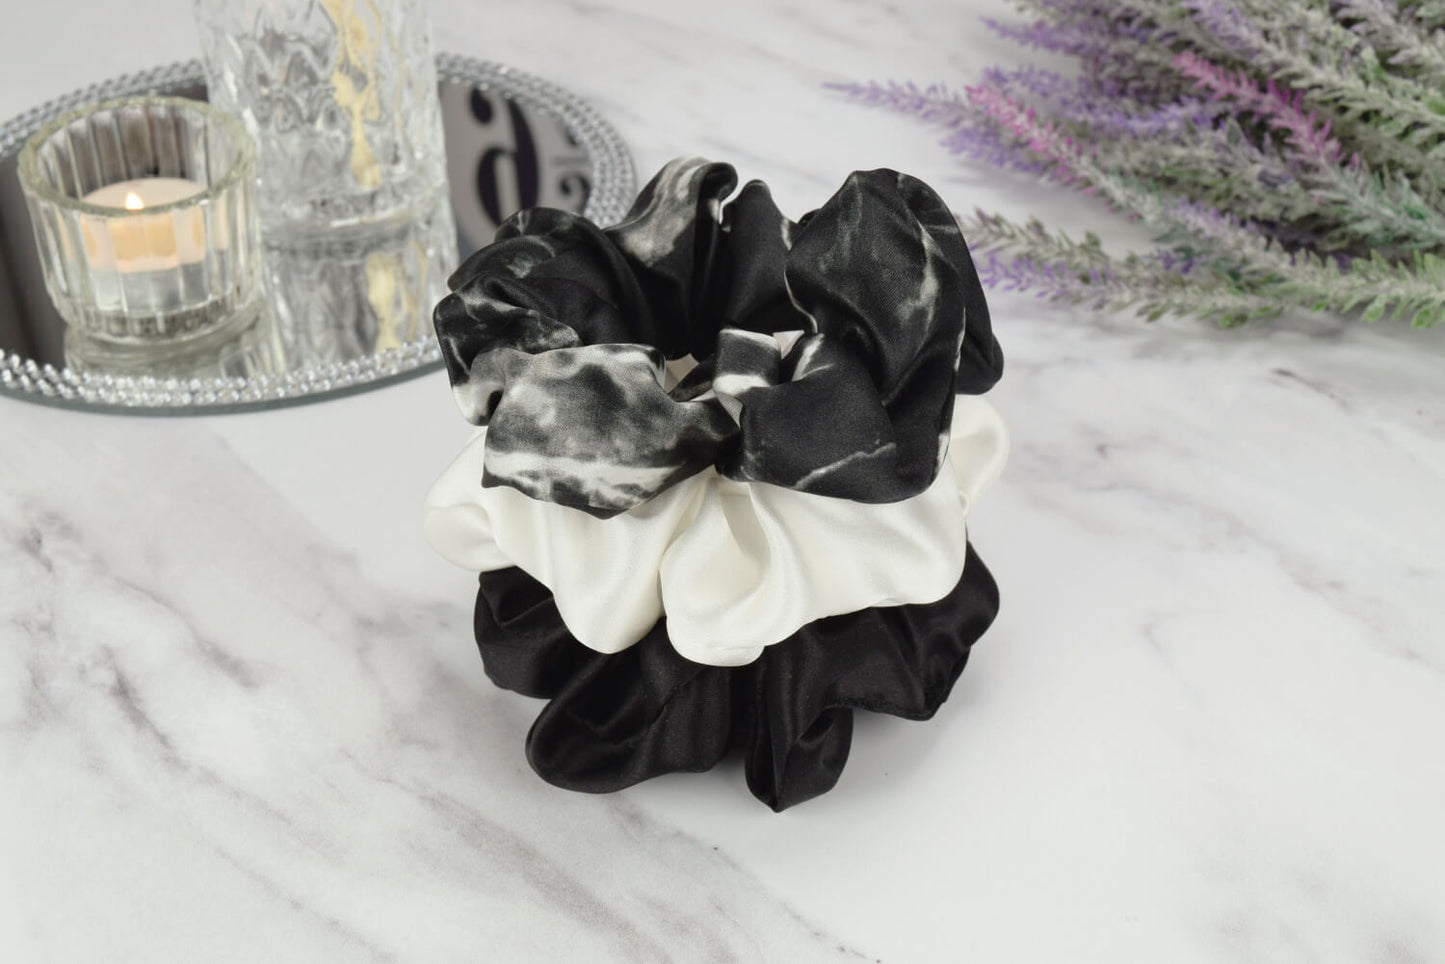 Celestial Silk large black marble, ivory and black silk scrunchies stacked on marble counter with lavender plant and a candle in the background